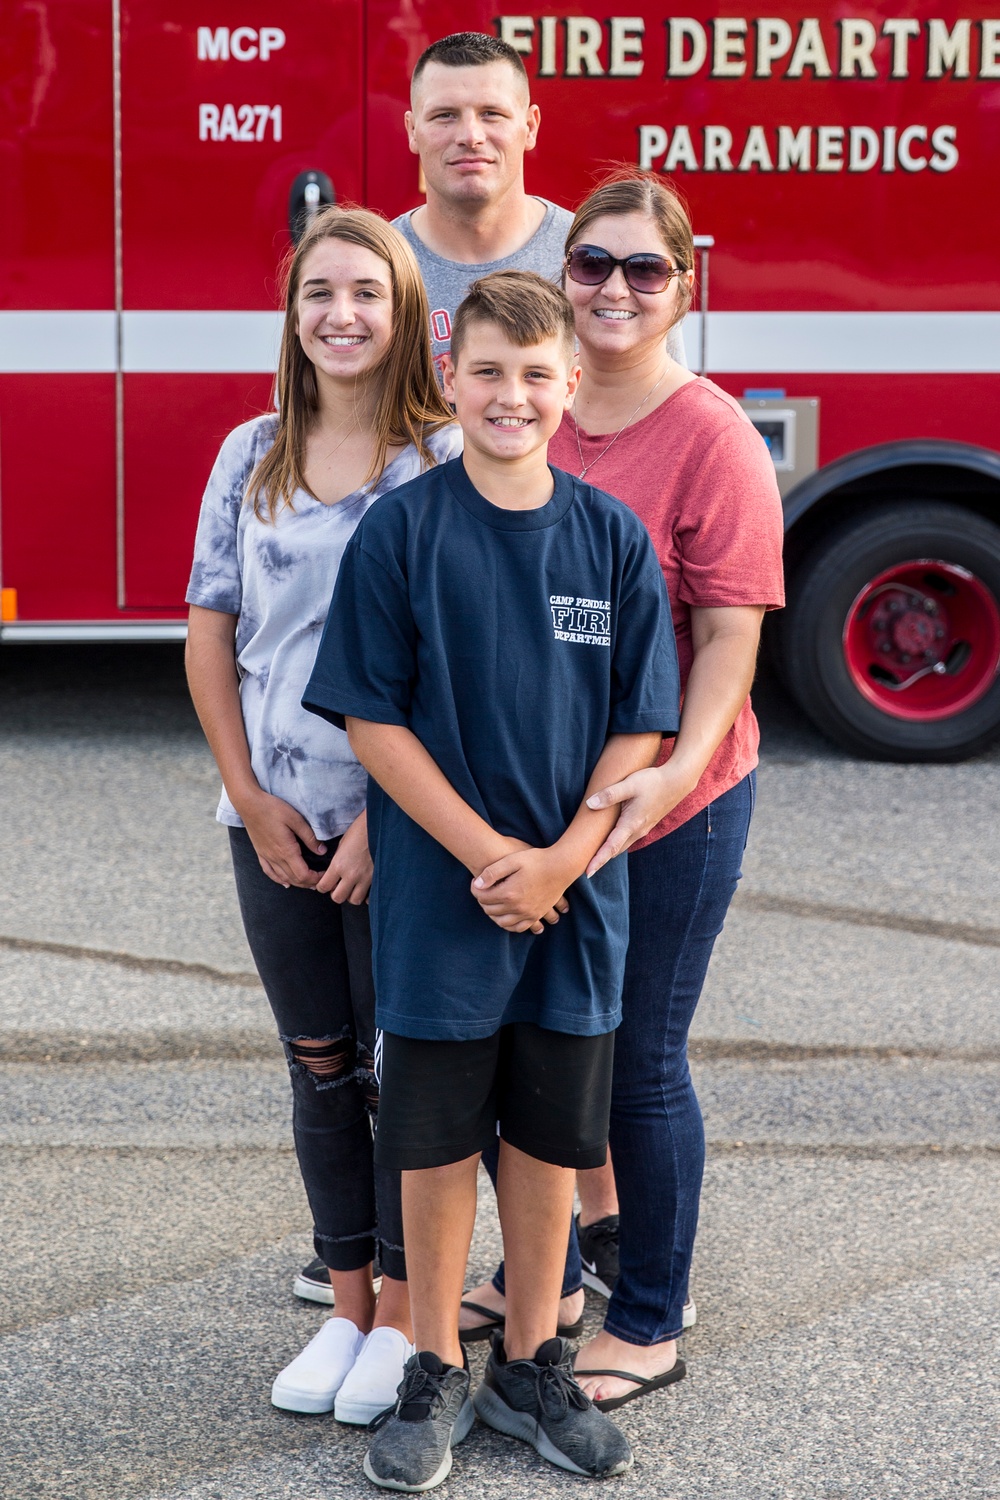 Courage under fire: Eleven year-old assists evacuation efforts during wildfire